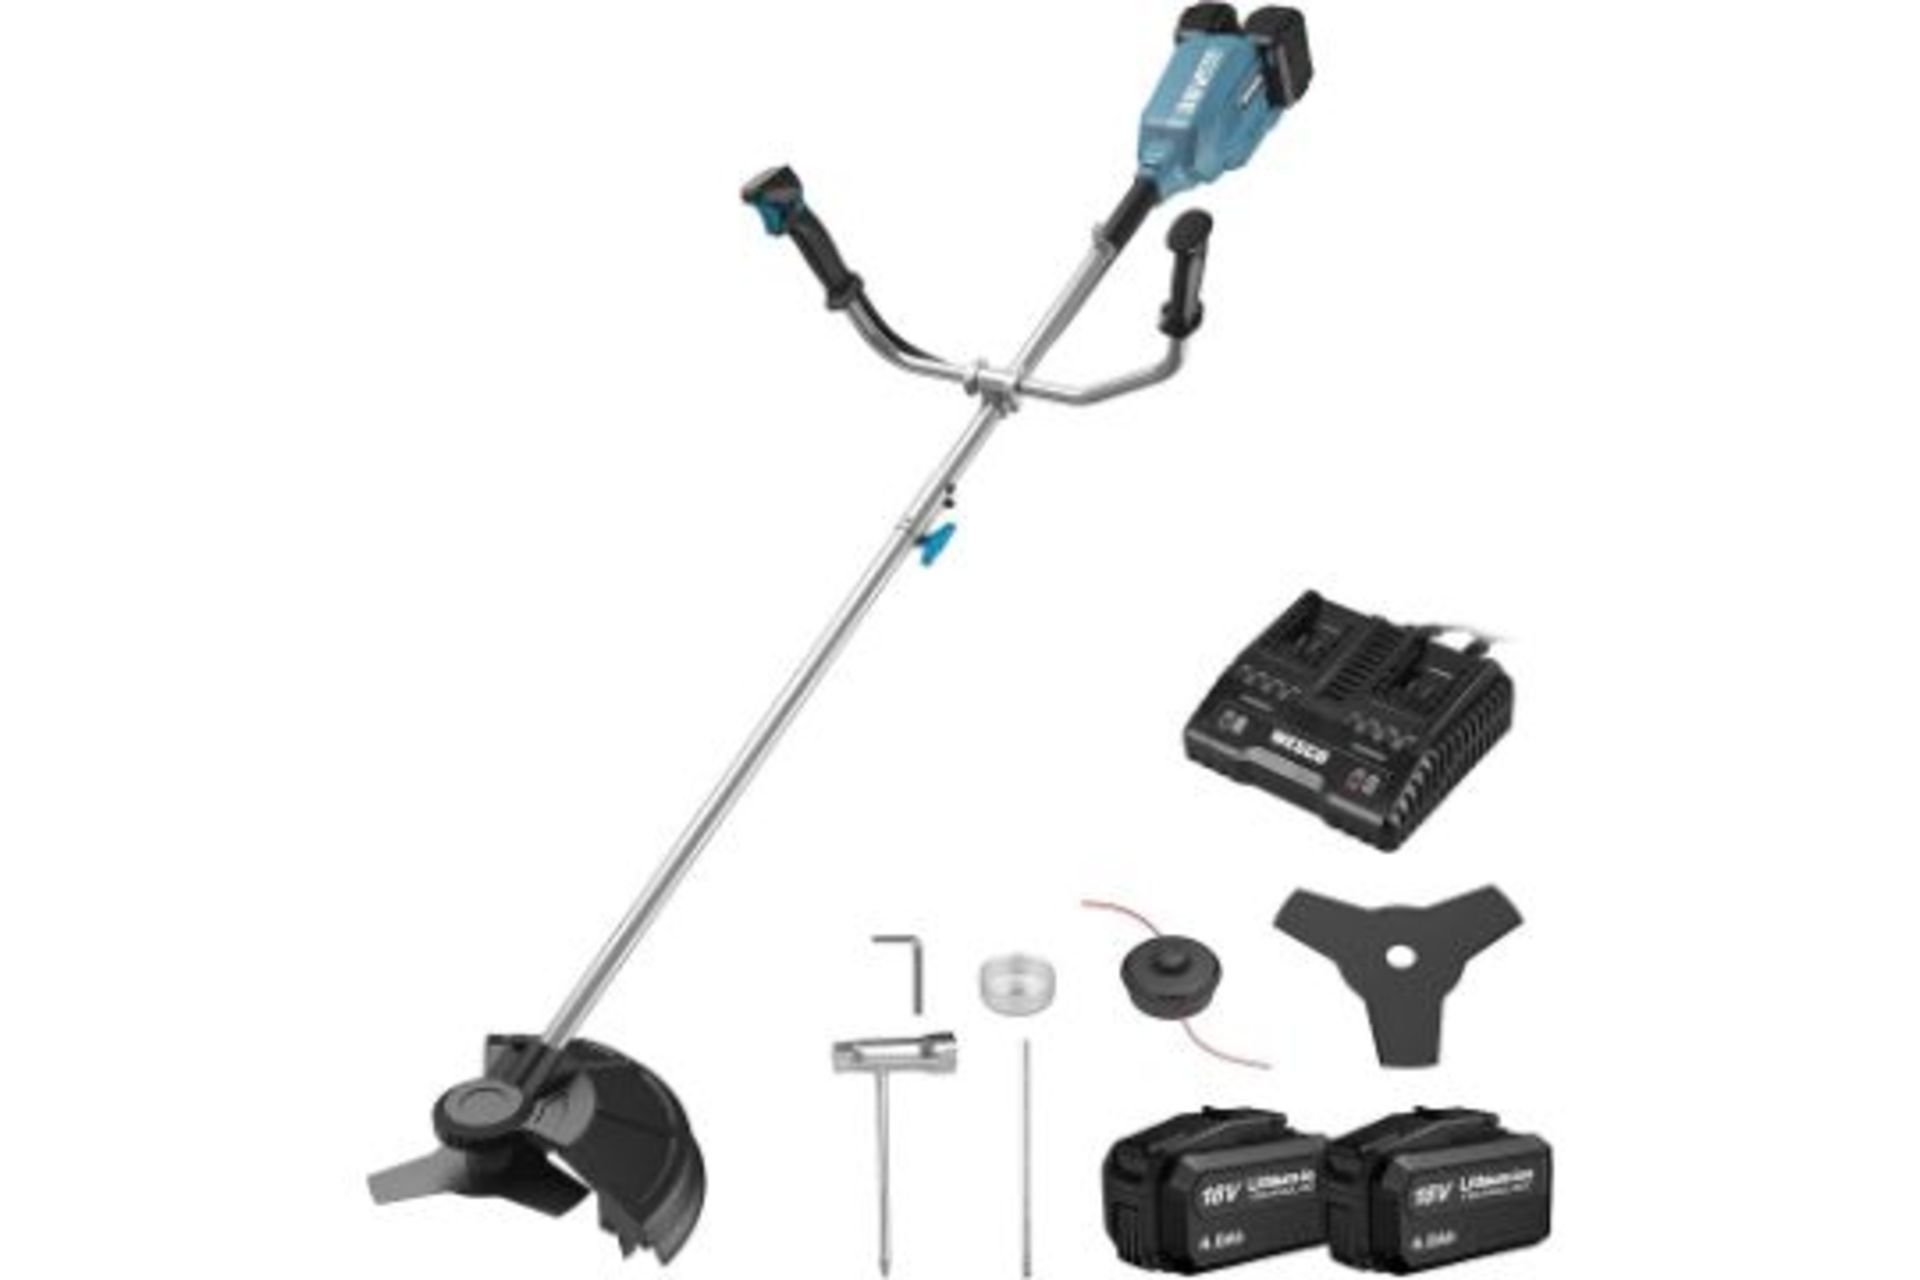 PALLET TO CONTAIN 24 x New & Boxed WESCO 2-in-1 String Trimmer/Edger with 36V 2 * 4.0 Ah Battery,